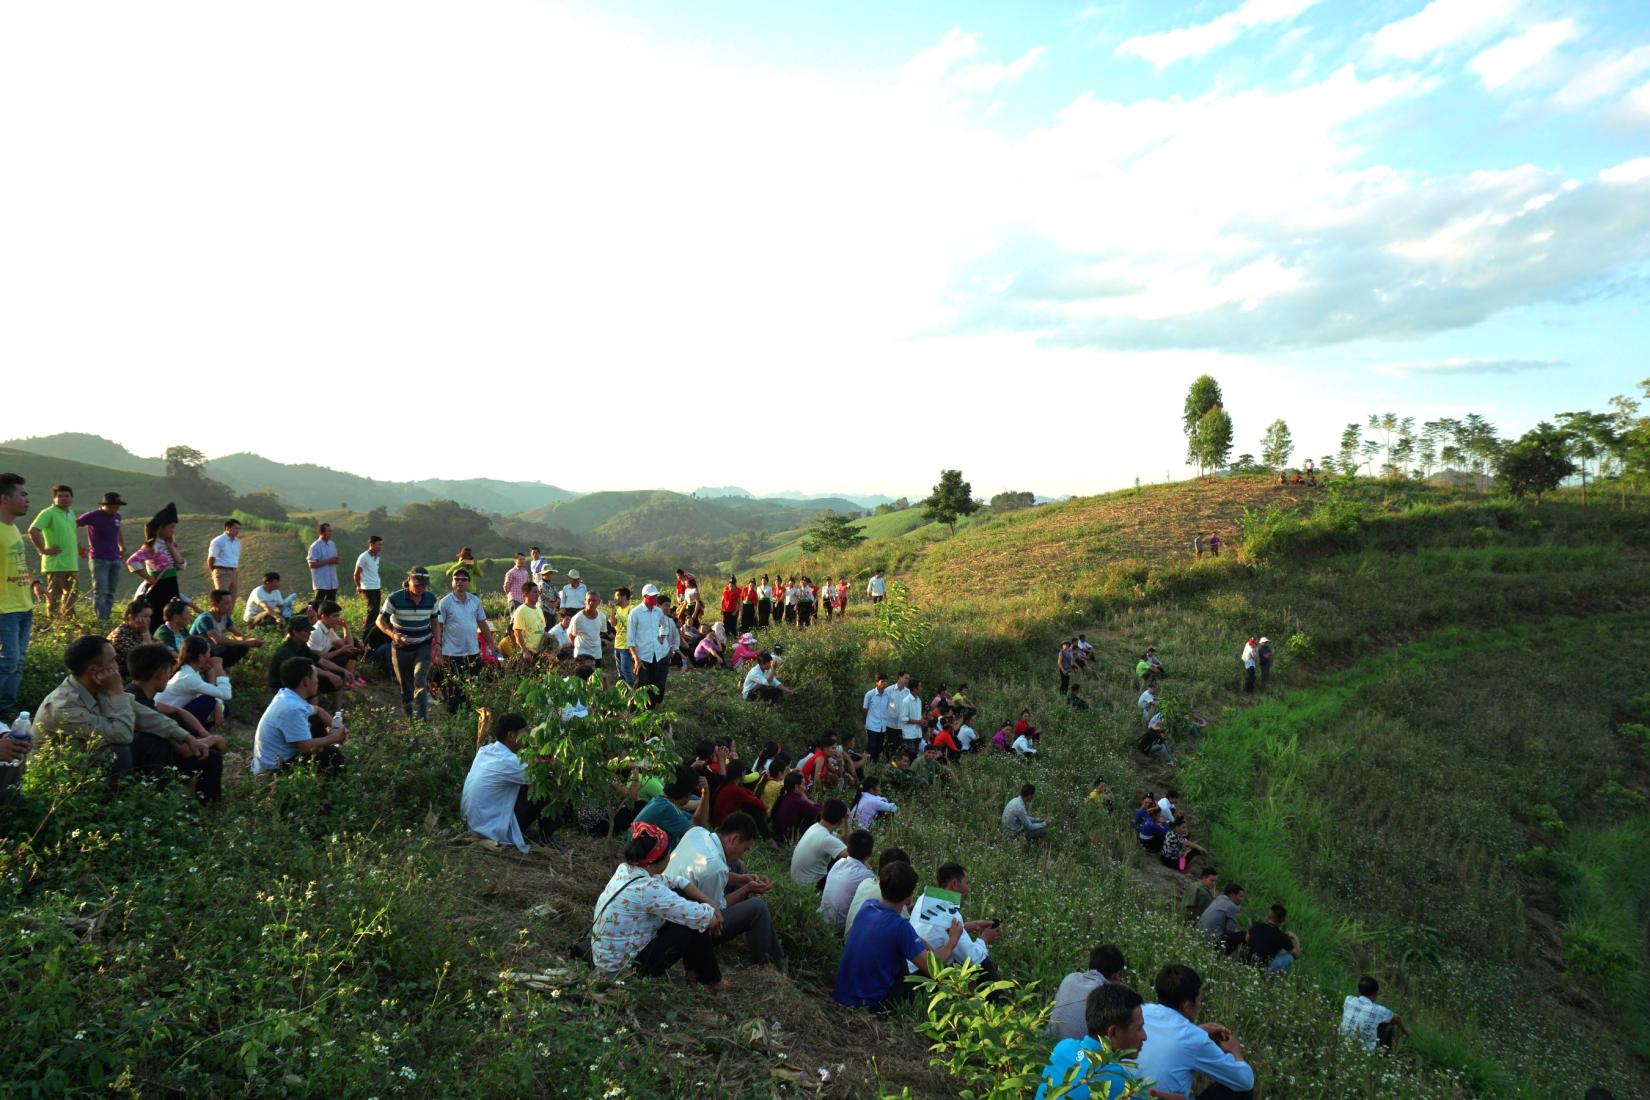 A group of people siting and standing looking out over a hillside